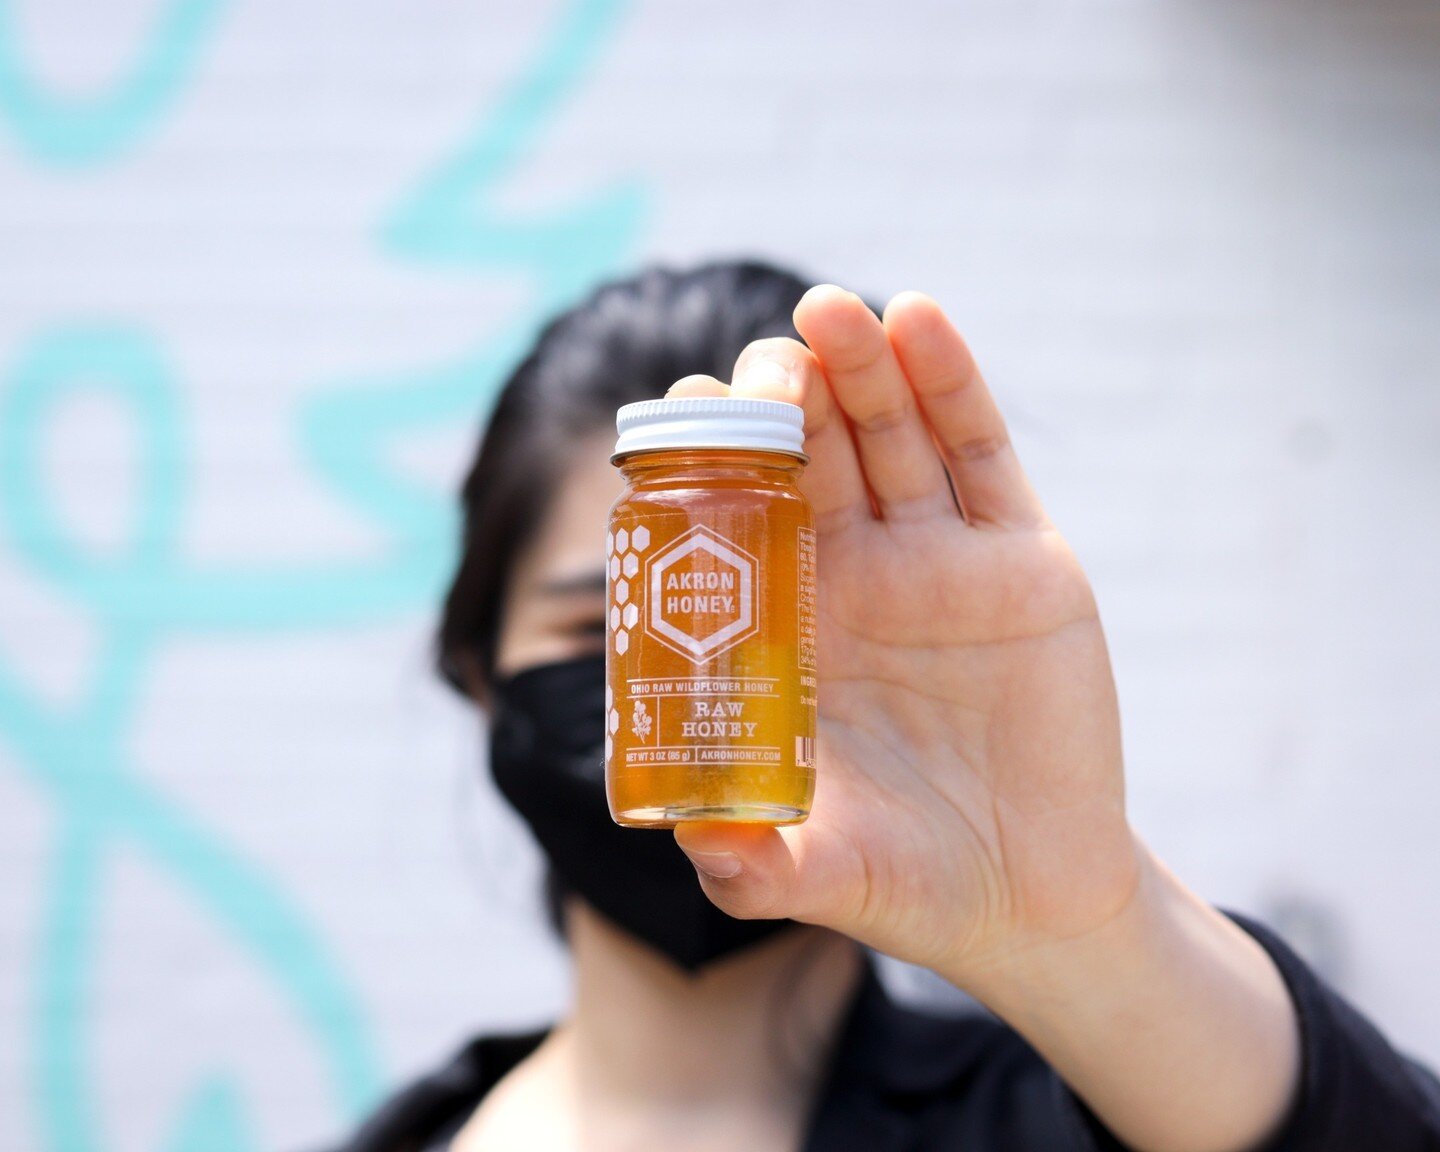 We're more than a little excited to announce we're now using raw, local honey from @akronhoney in our bar drinks (and carrying 3oz. retail jars at all Phoenix caf&eacute;s!).⁠
⁠
We love their product as much as their story, with Wesley the Beekeeper 